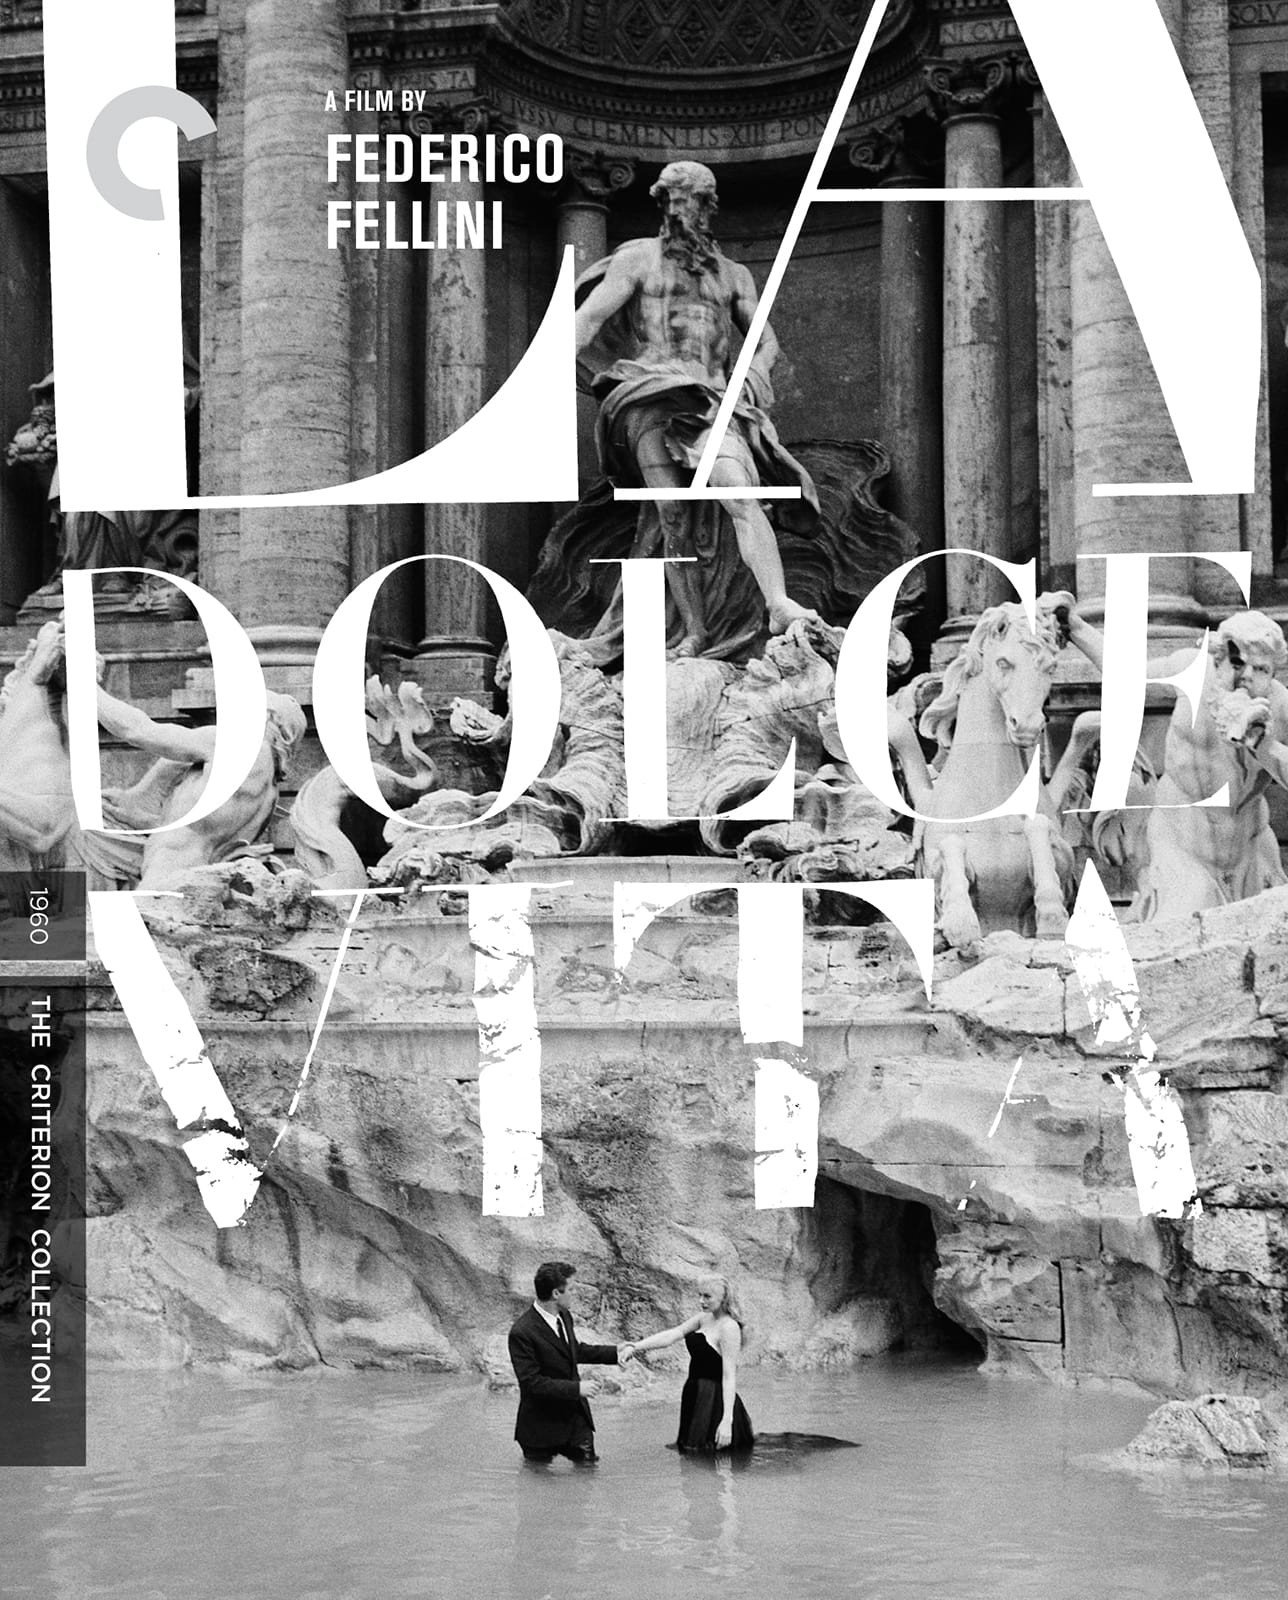 Featured image for “Today in History: La Dolce Vita has its film premiere in Italy”